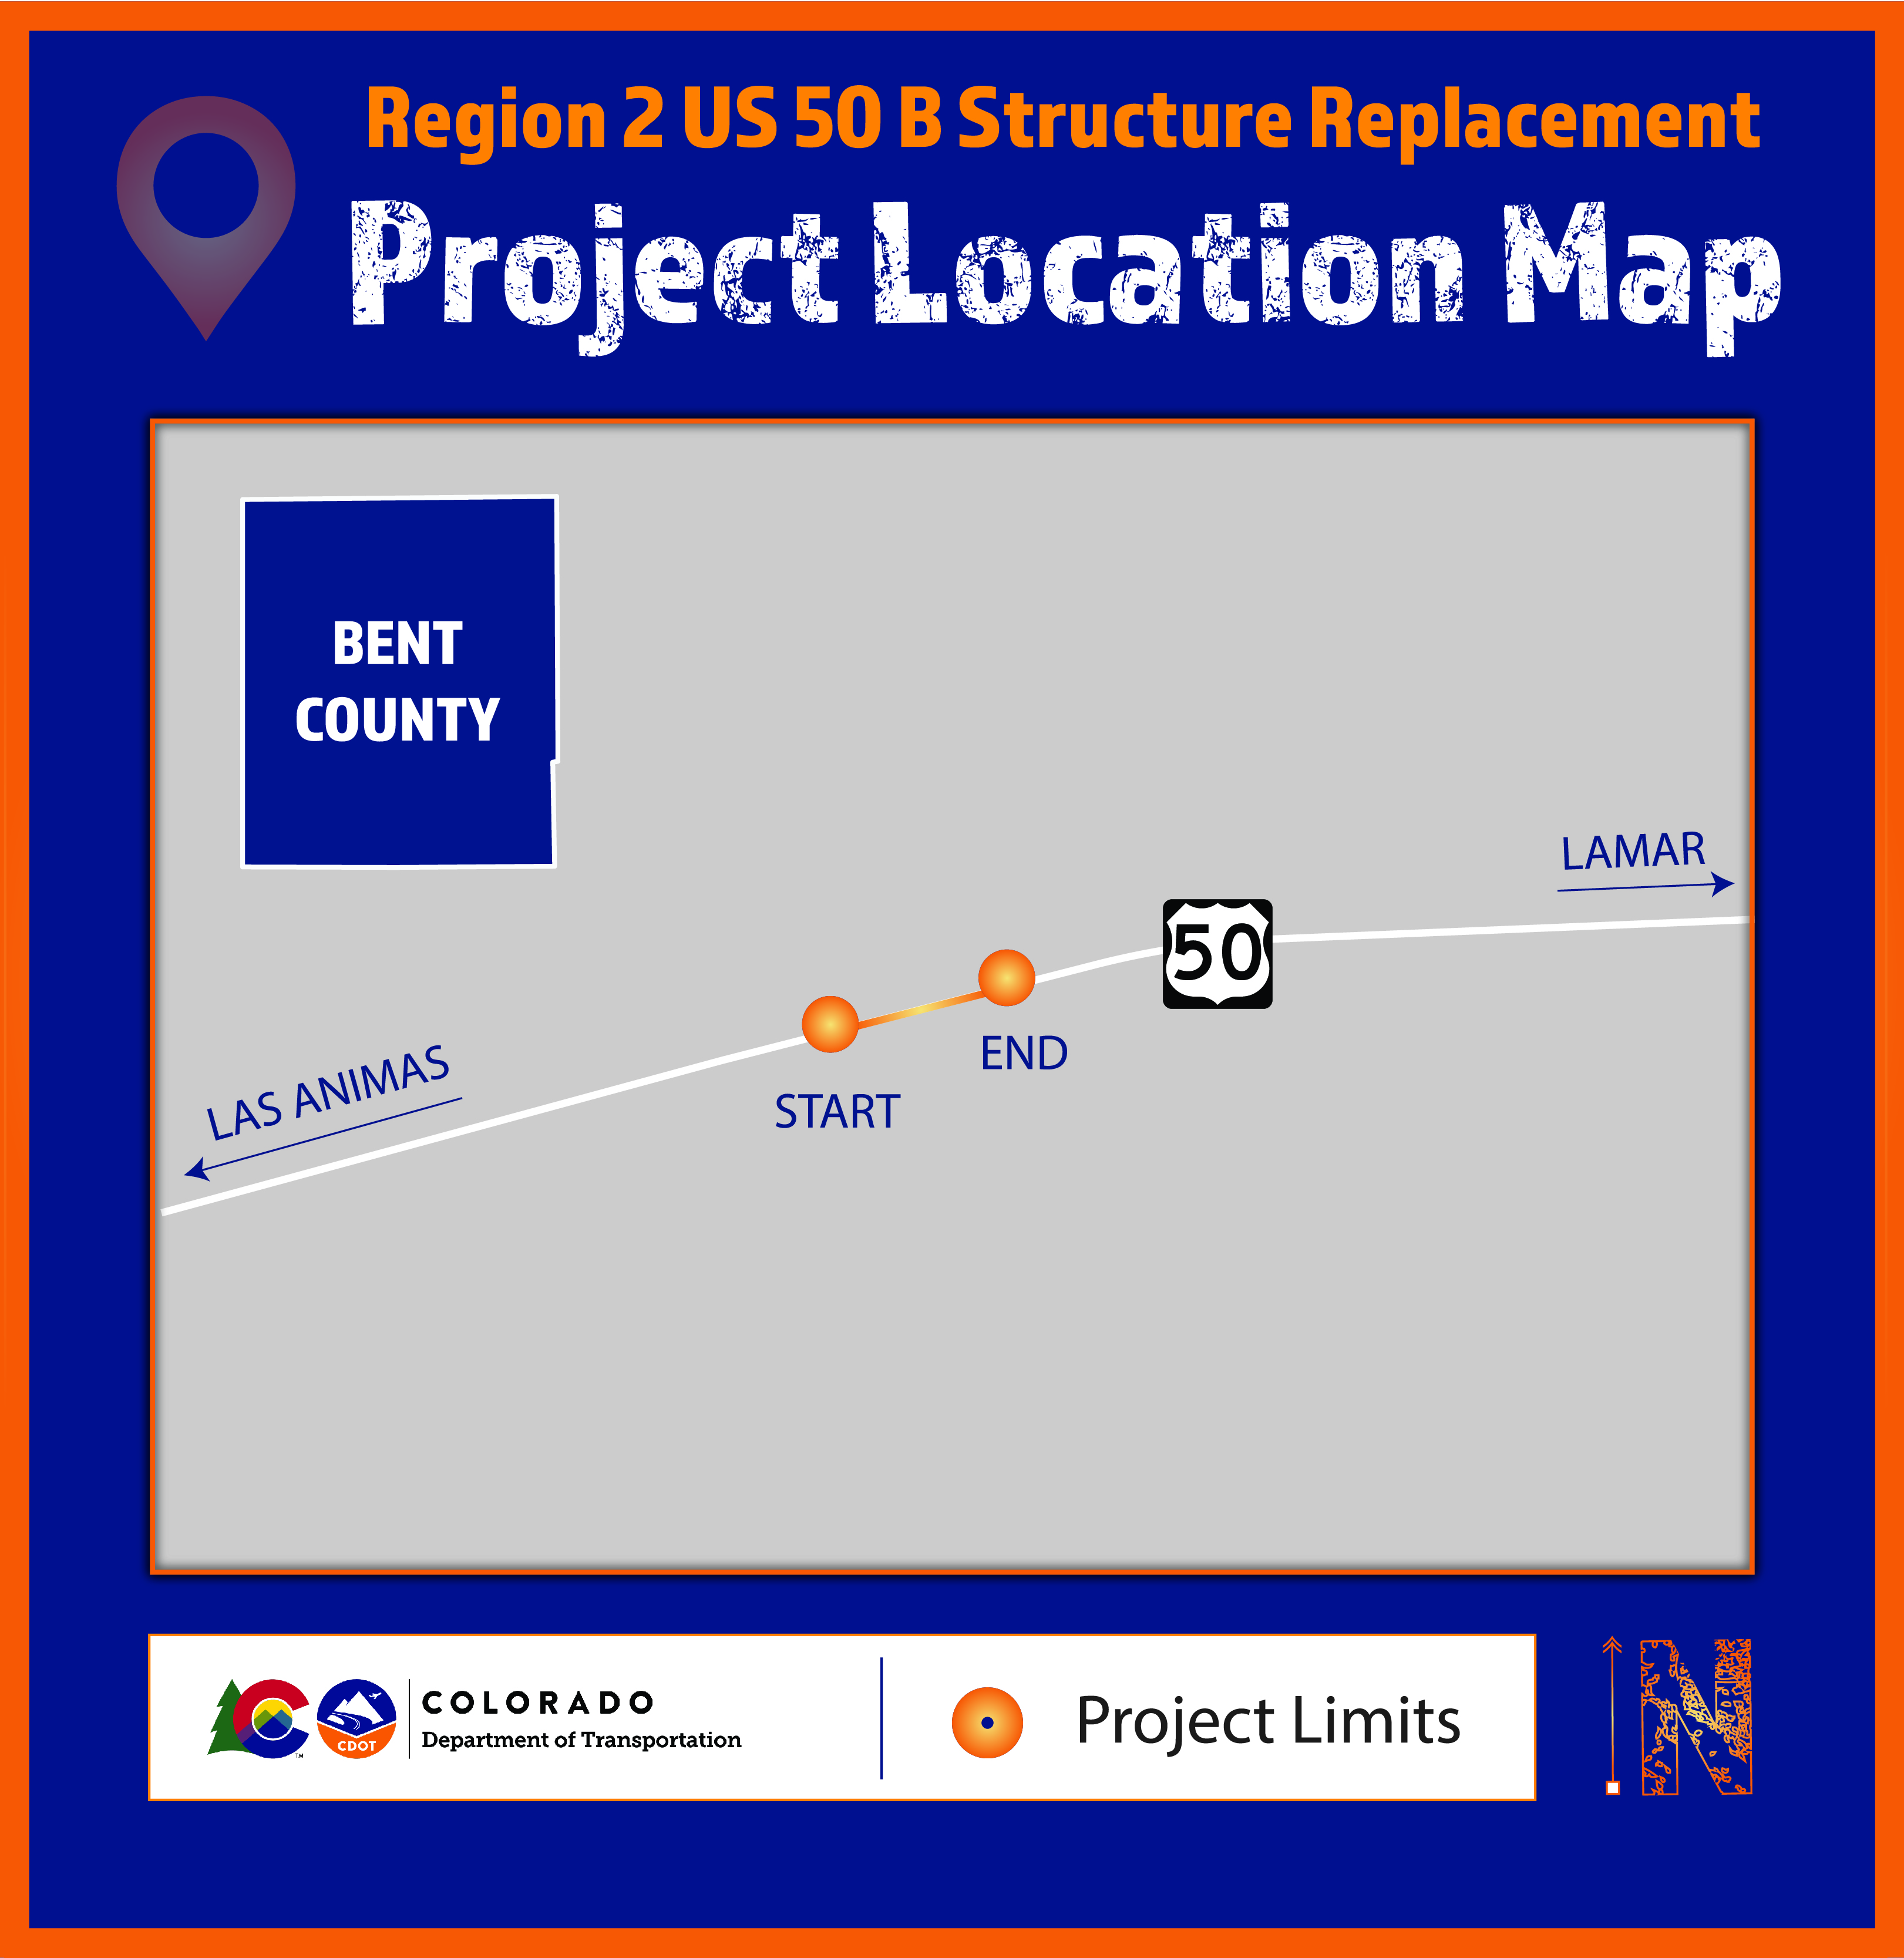 US 50b Structure Replacement Project Location Map v1 4.1.22-01.jpg detail image